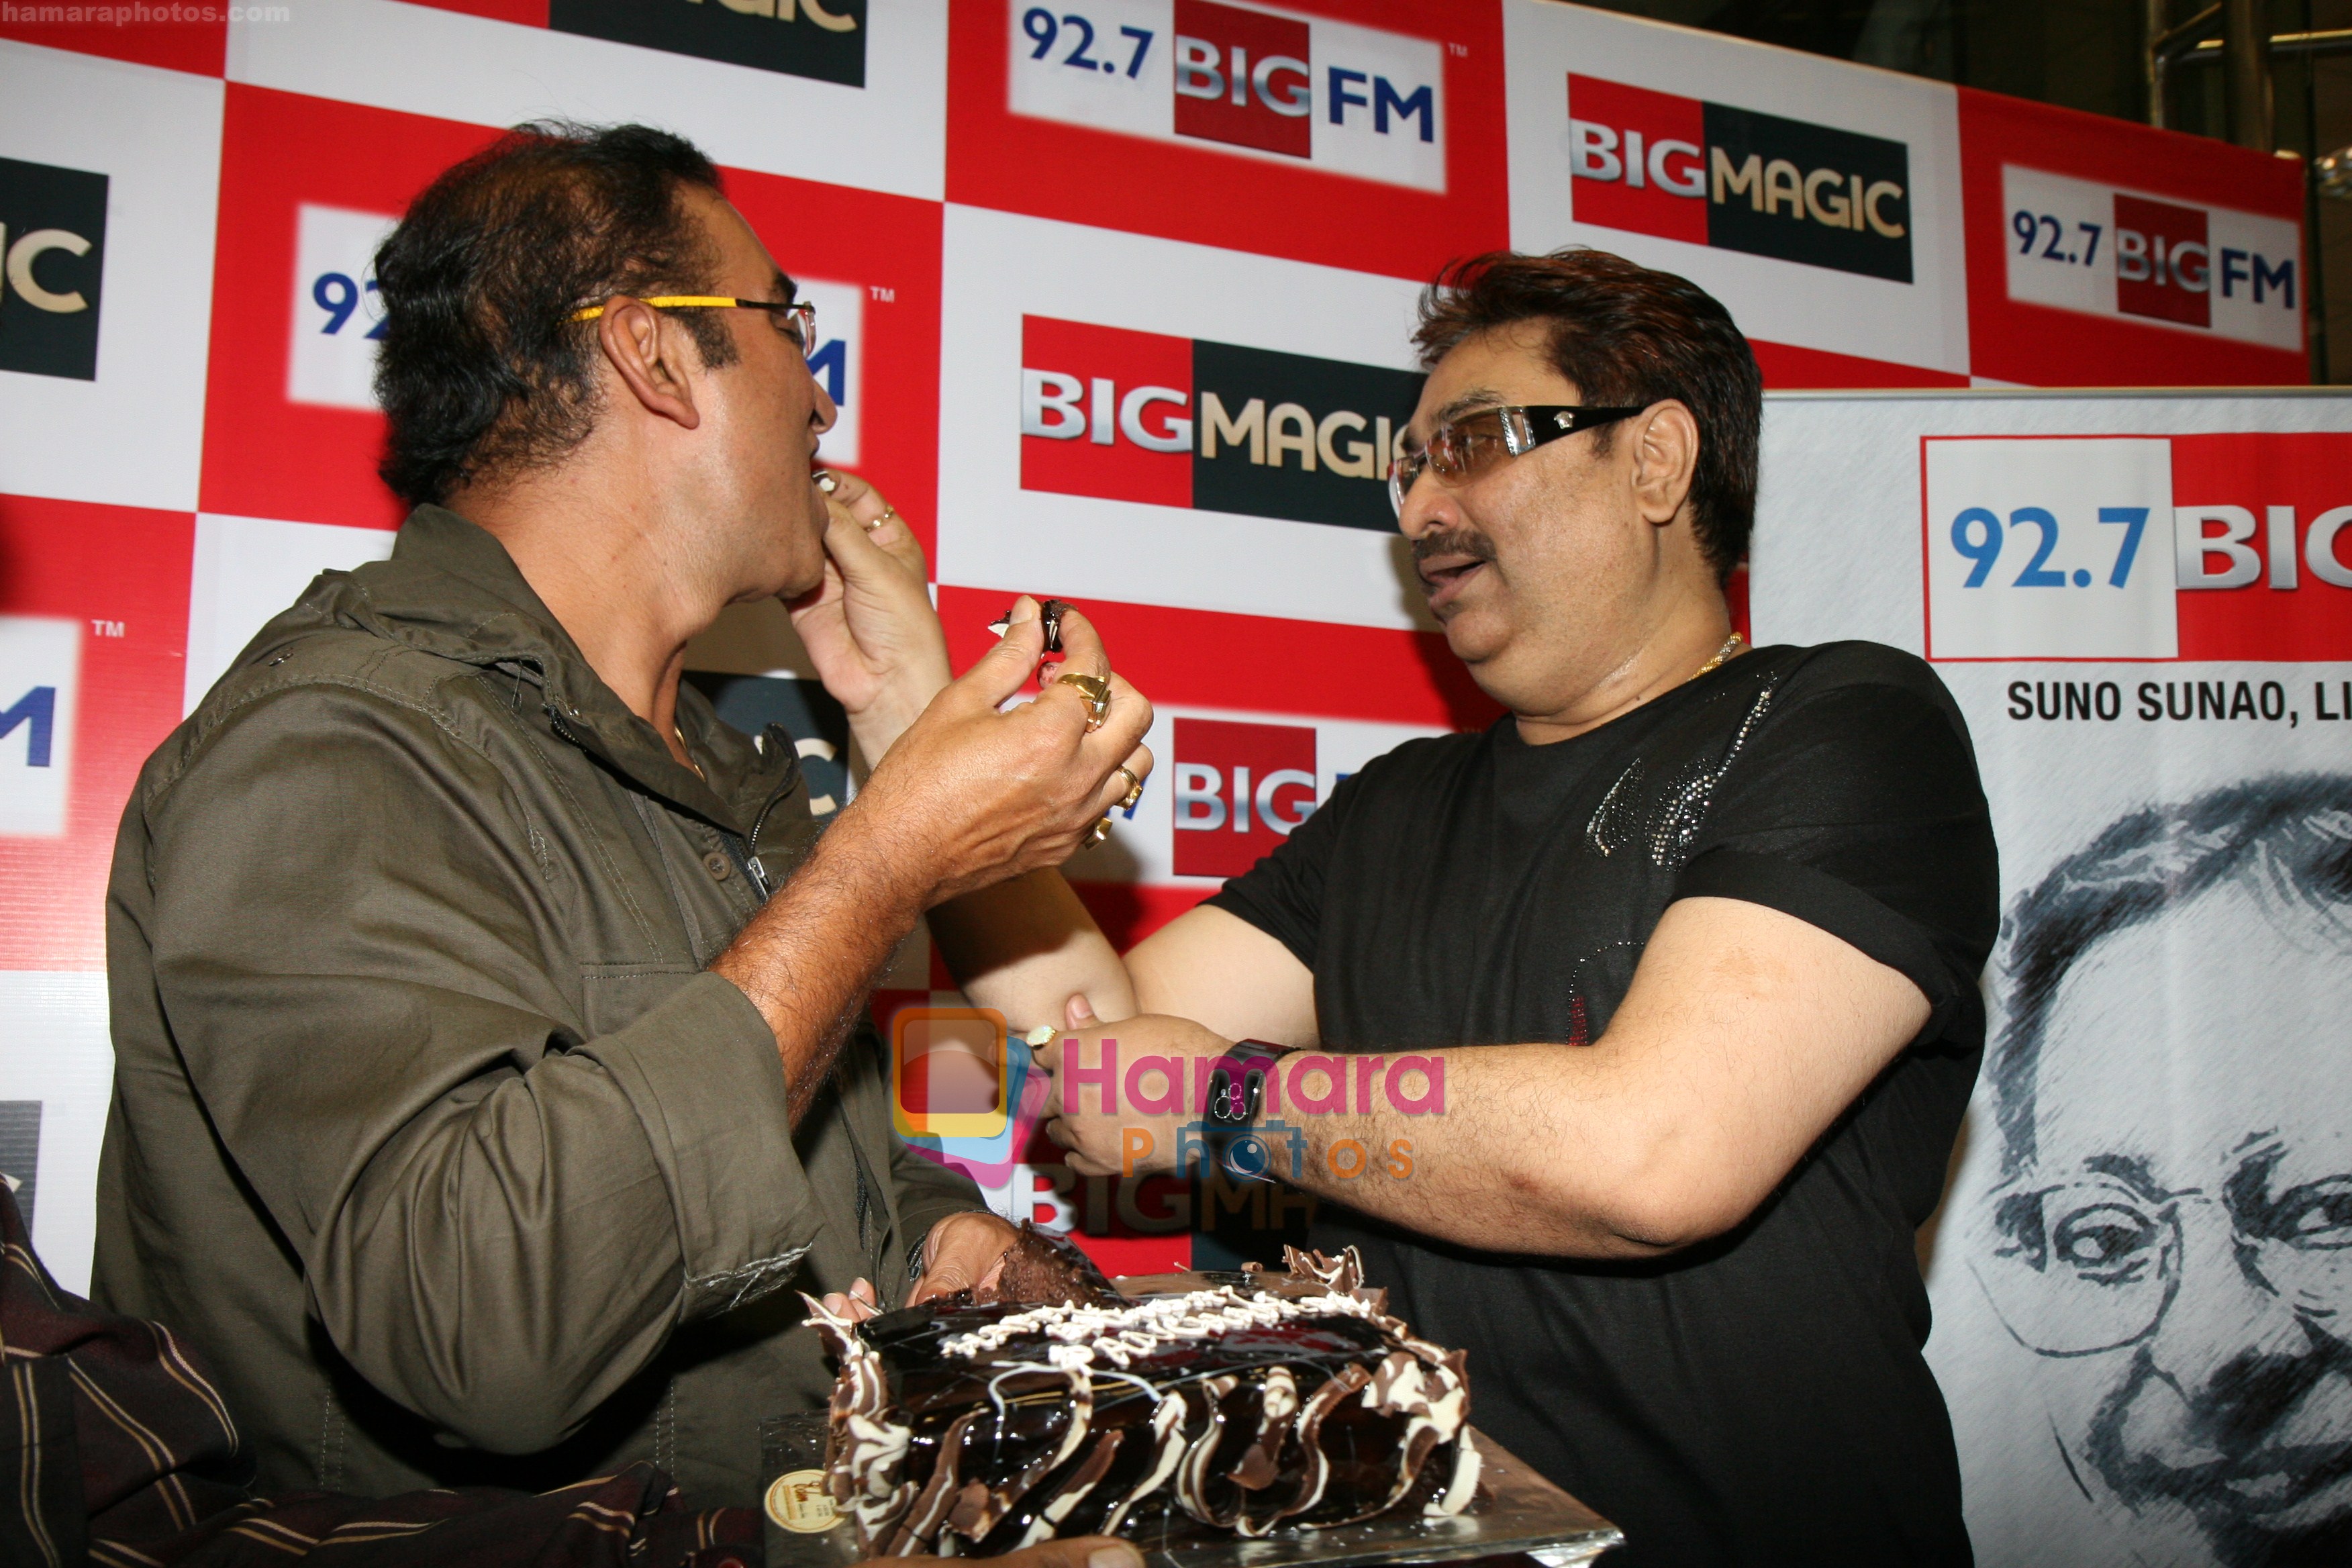 Abhijeet and Kumar Shanu feed each cake which was cut on the occassion of R D Burman's birth anniversary at 92.7 Big FM in Mumbai, June 27, 2011